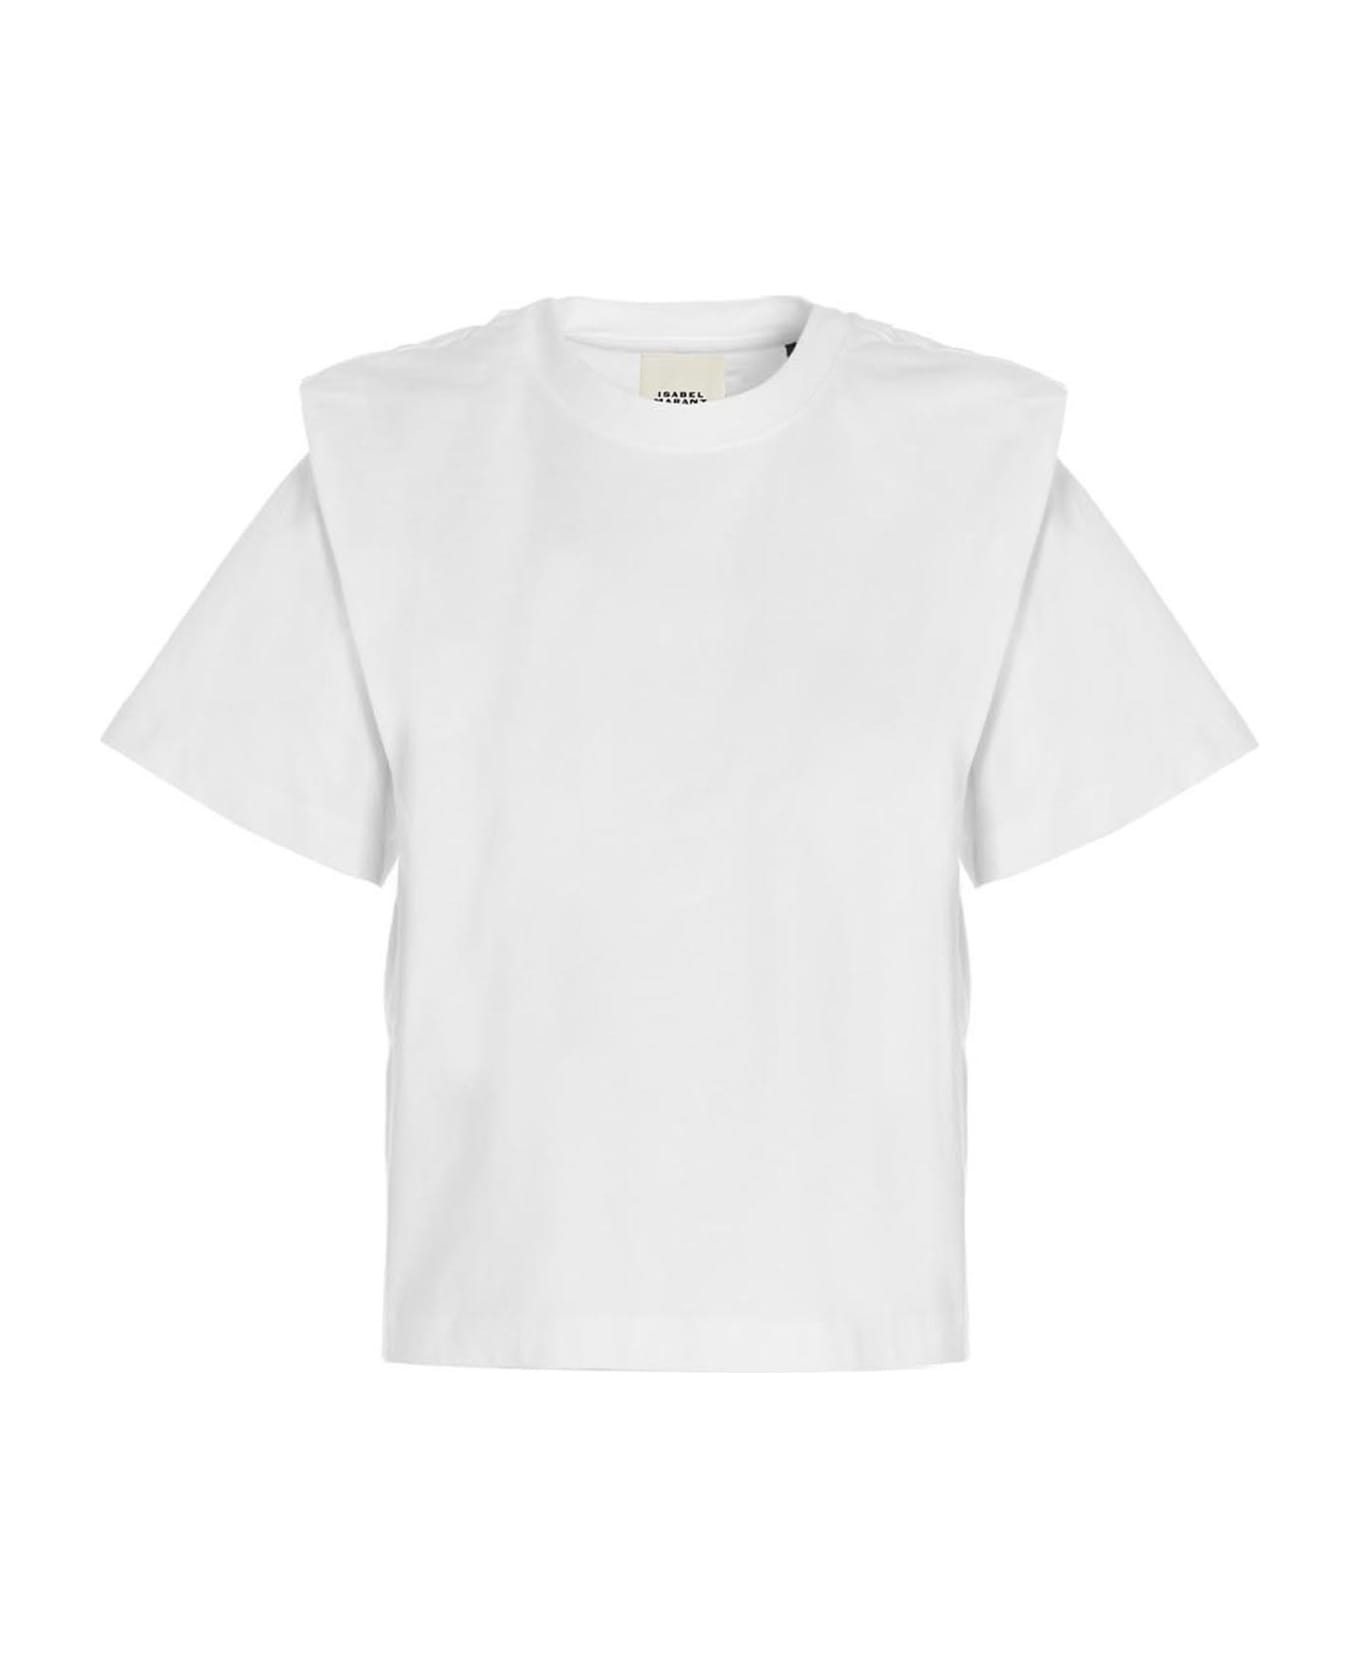 Isabel Marant Cropped T-shirt - WHITE Tシャツ